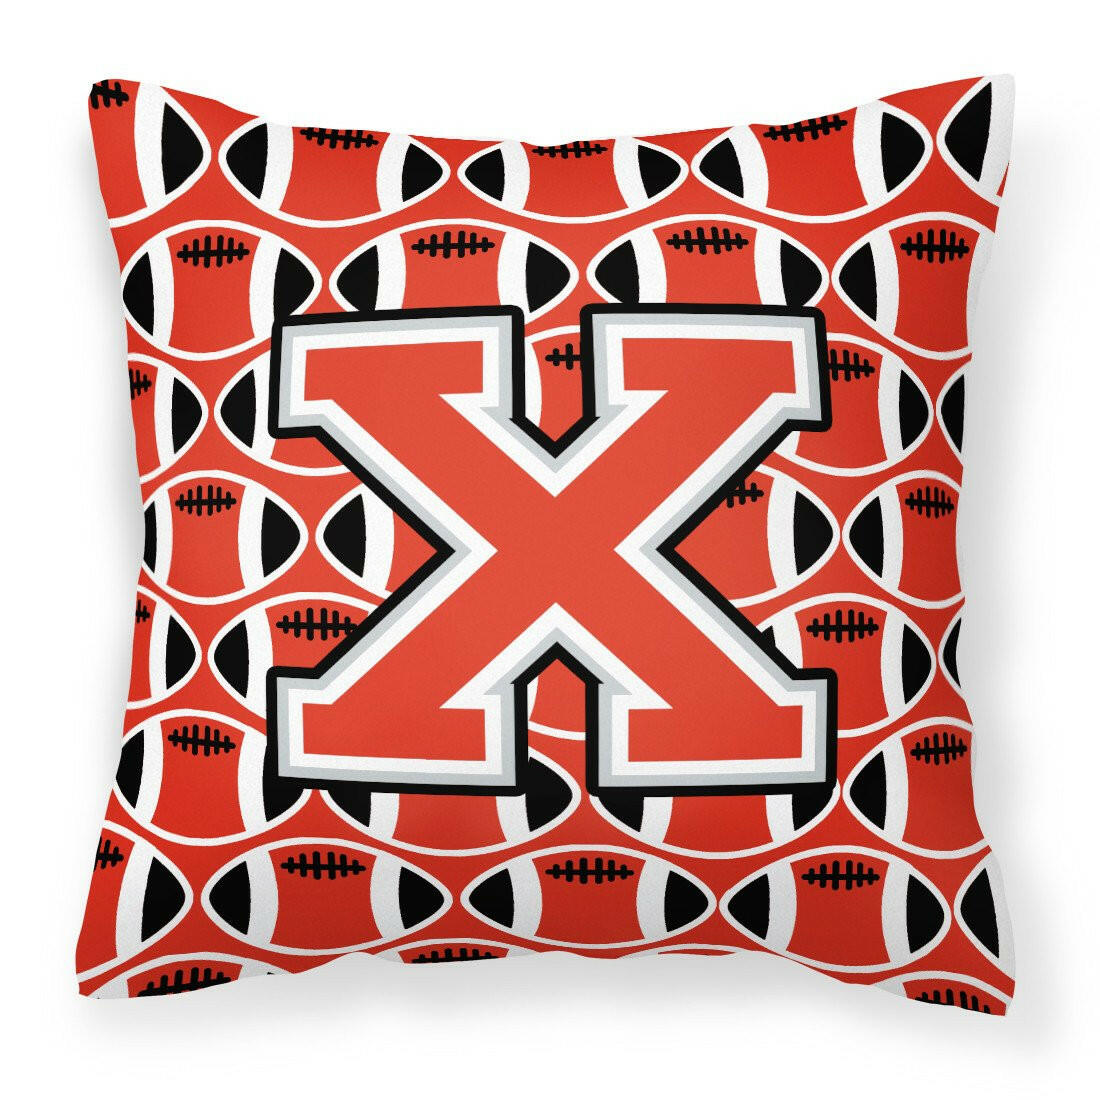 Letter X Football Scarlet and Grey Fabric Decorative Pillow CJ1067-XPW1414 by Caroline's Treasures